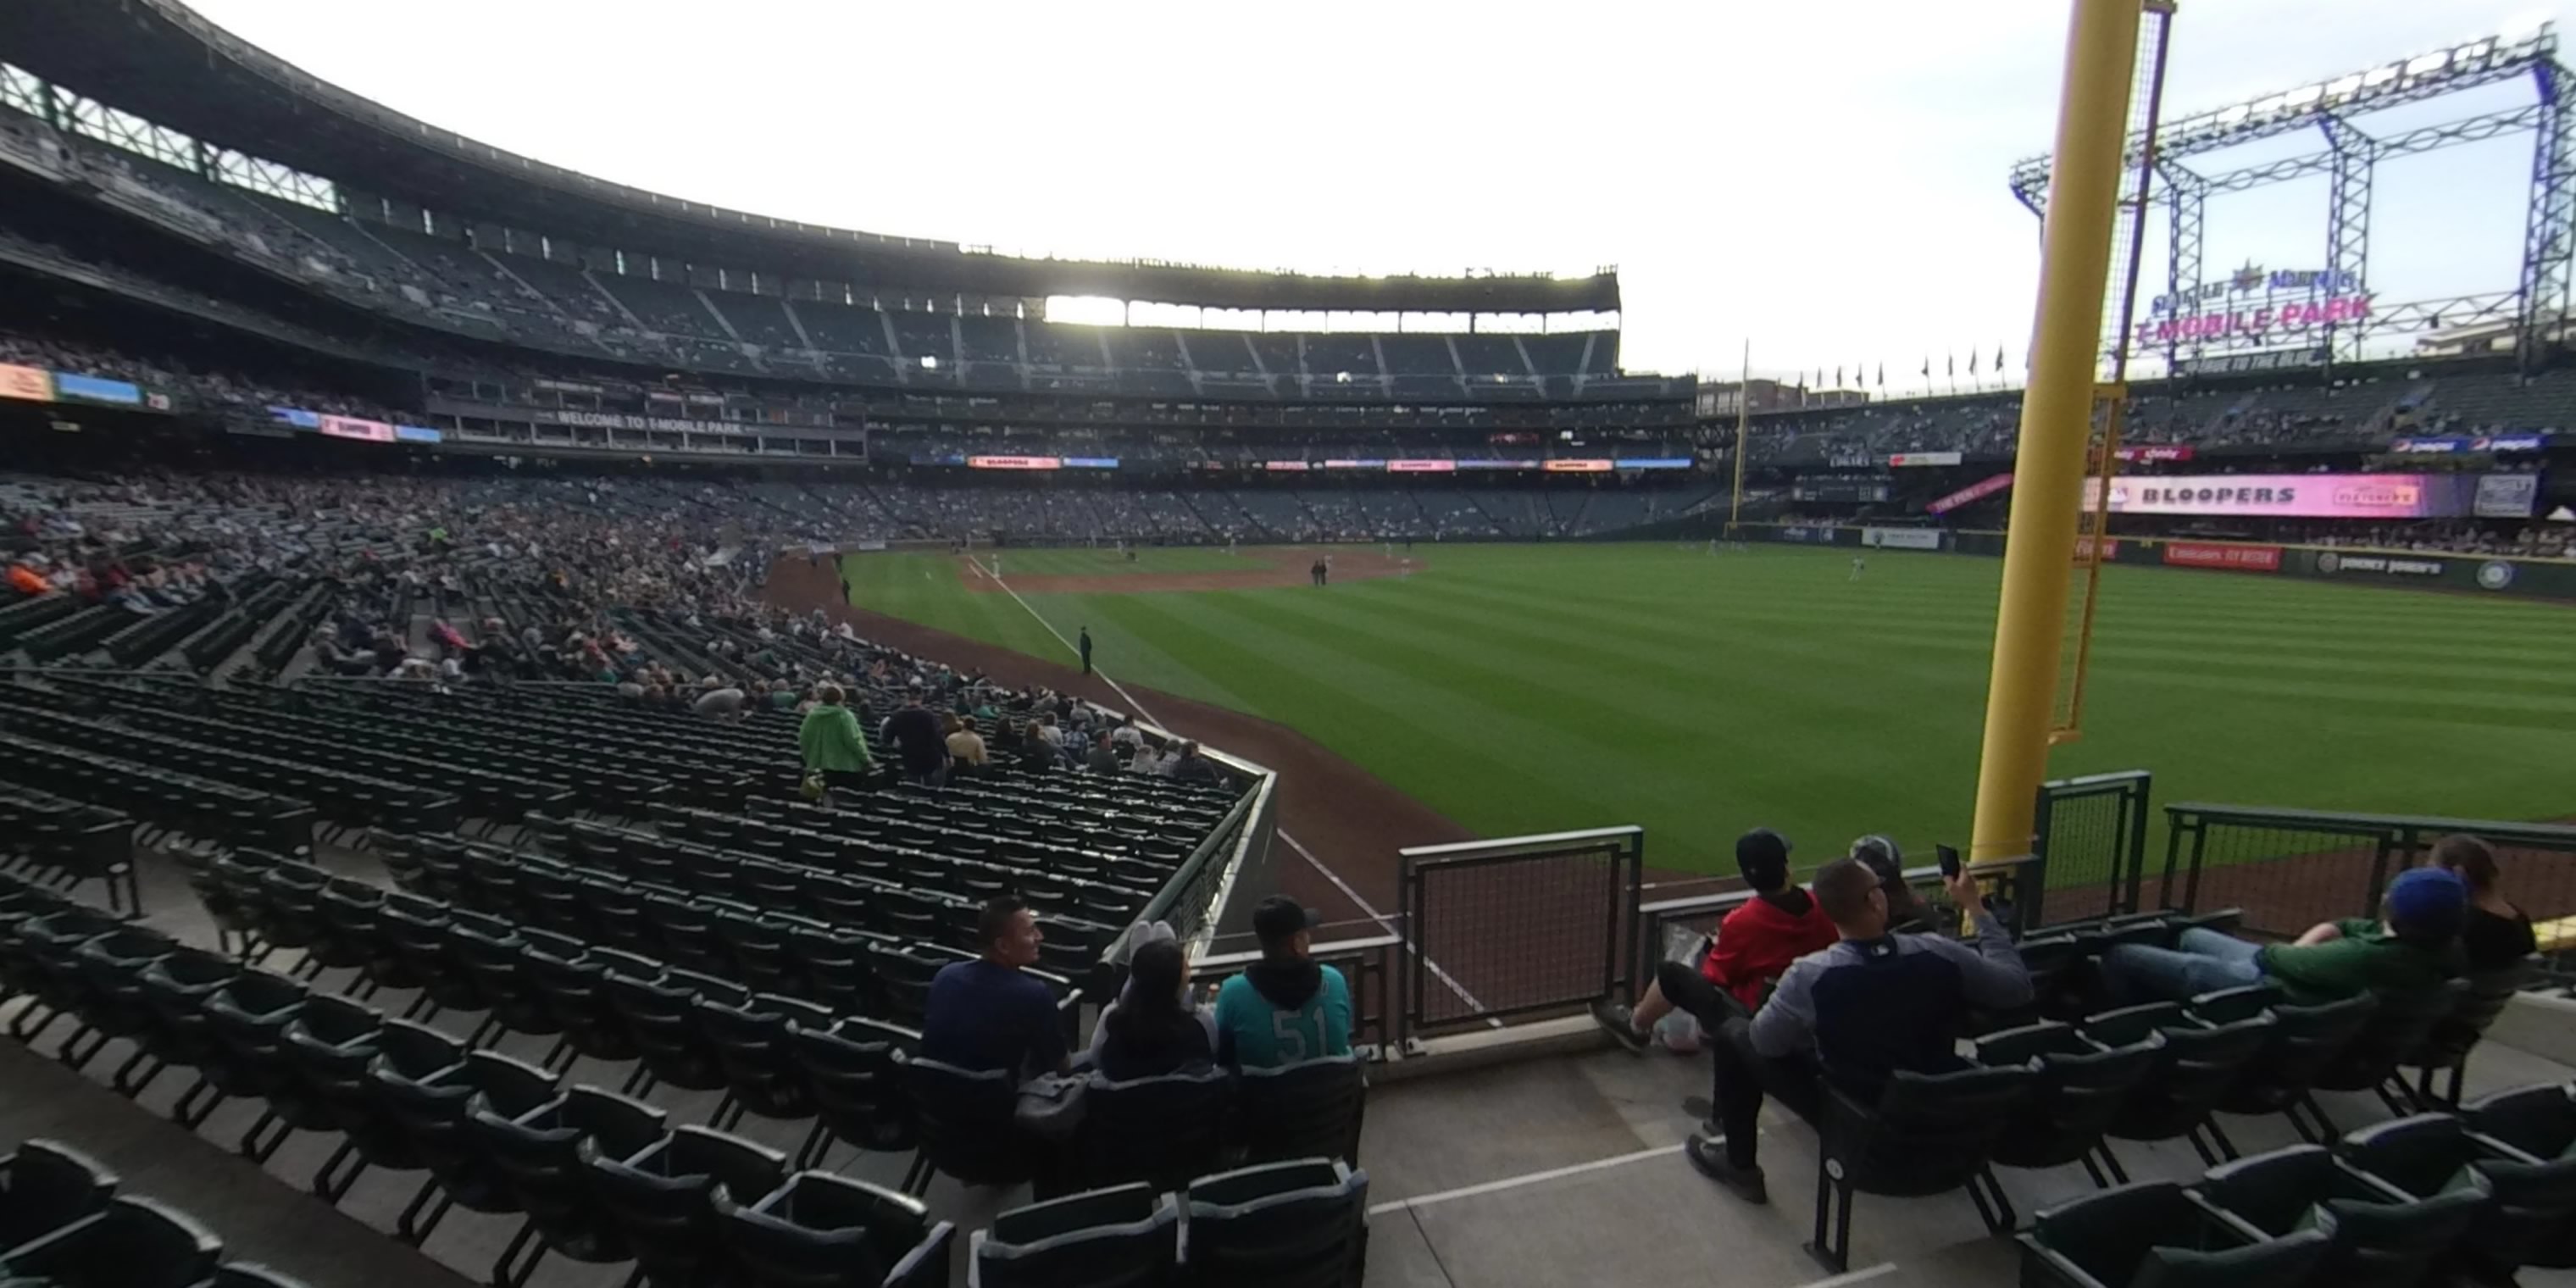 section 110 panoramic seat view  for baseball - t-mobile park